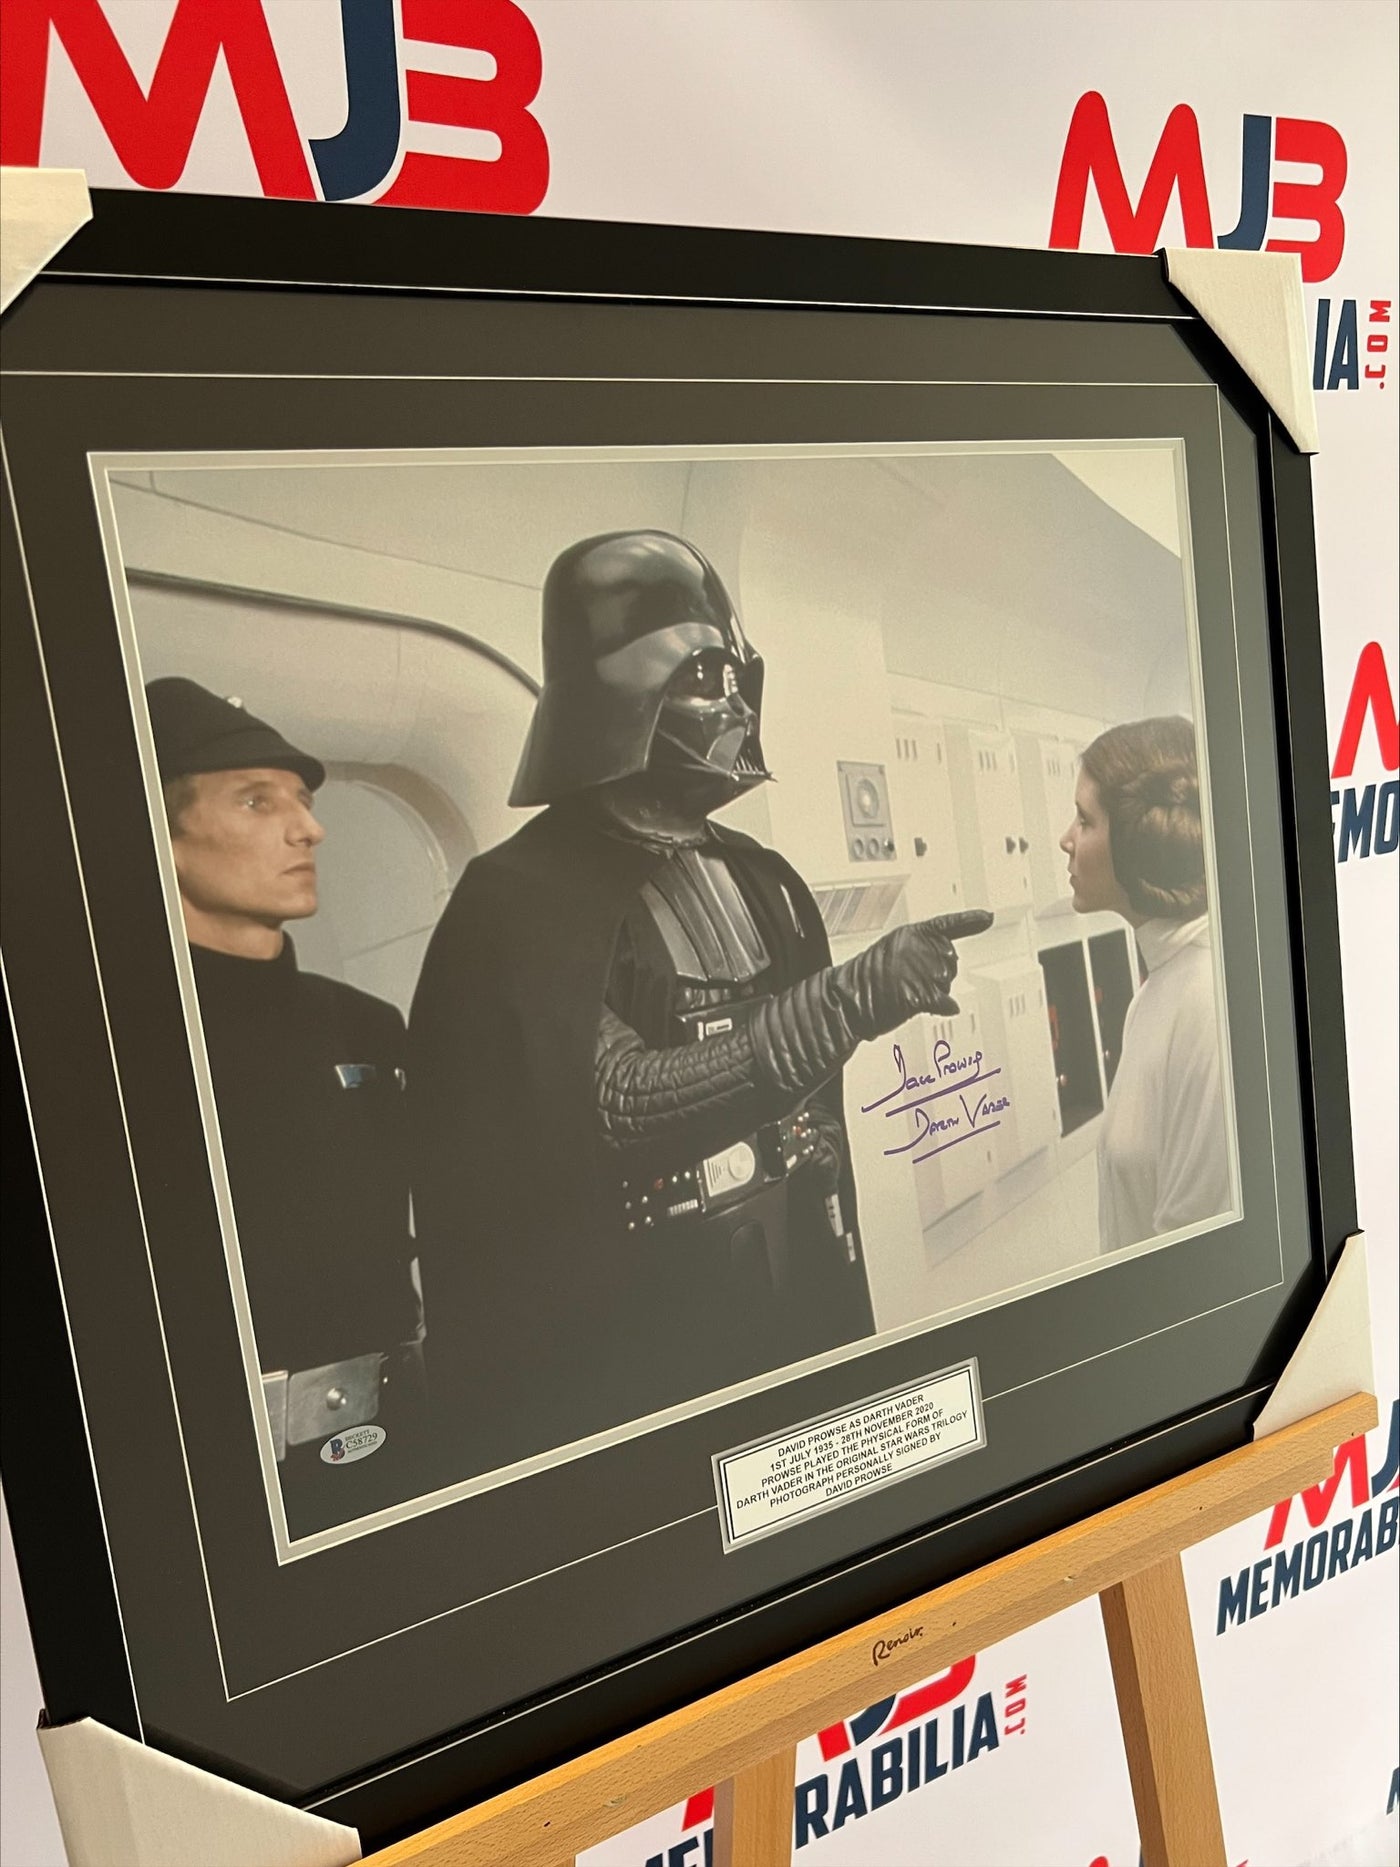 David Prowse Signed Star Wars A New Hope Inscribed Darth Vader Beckett Authentication